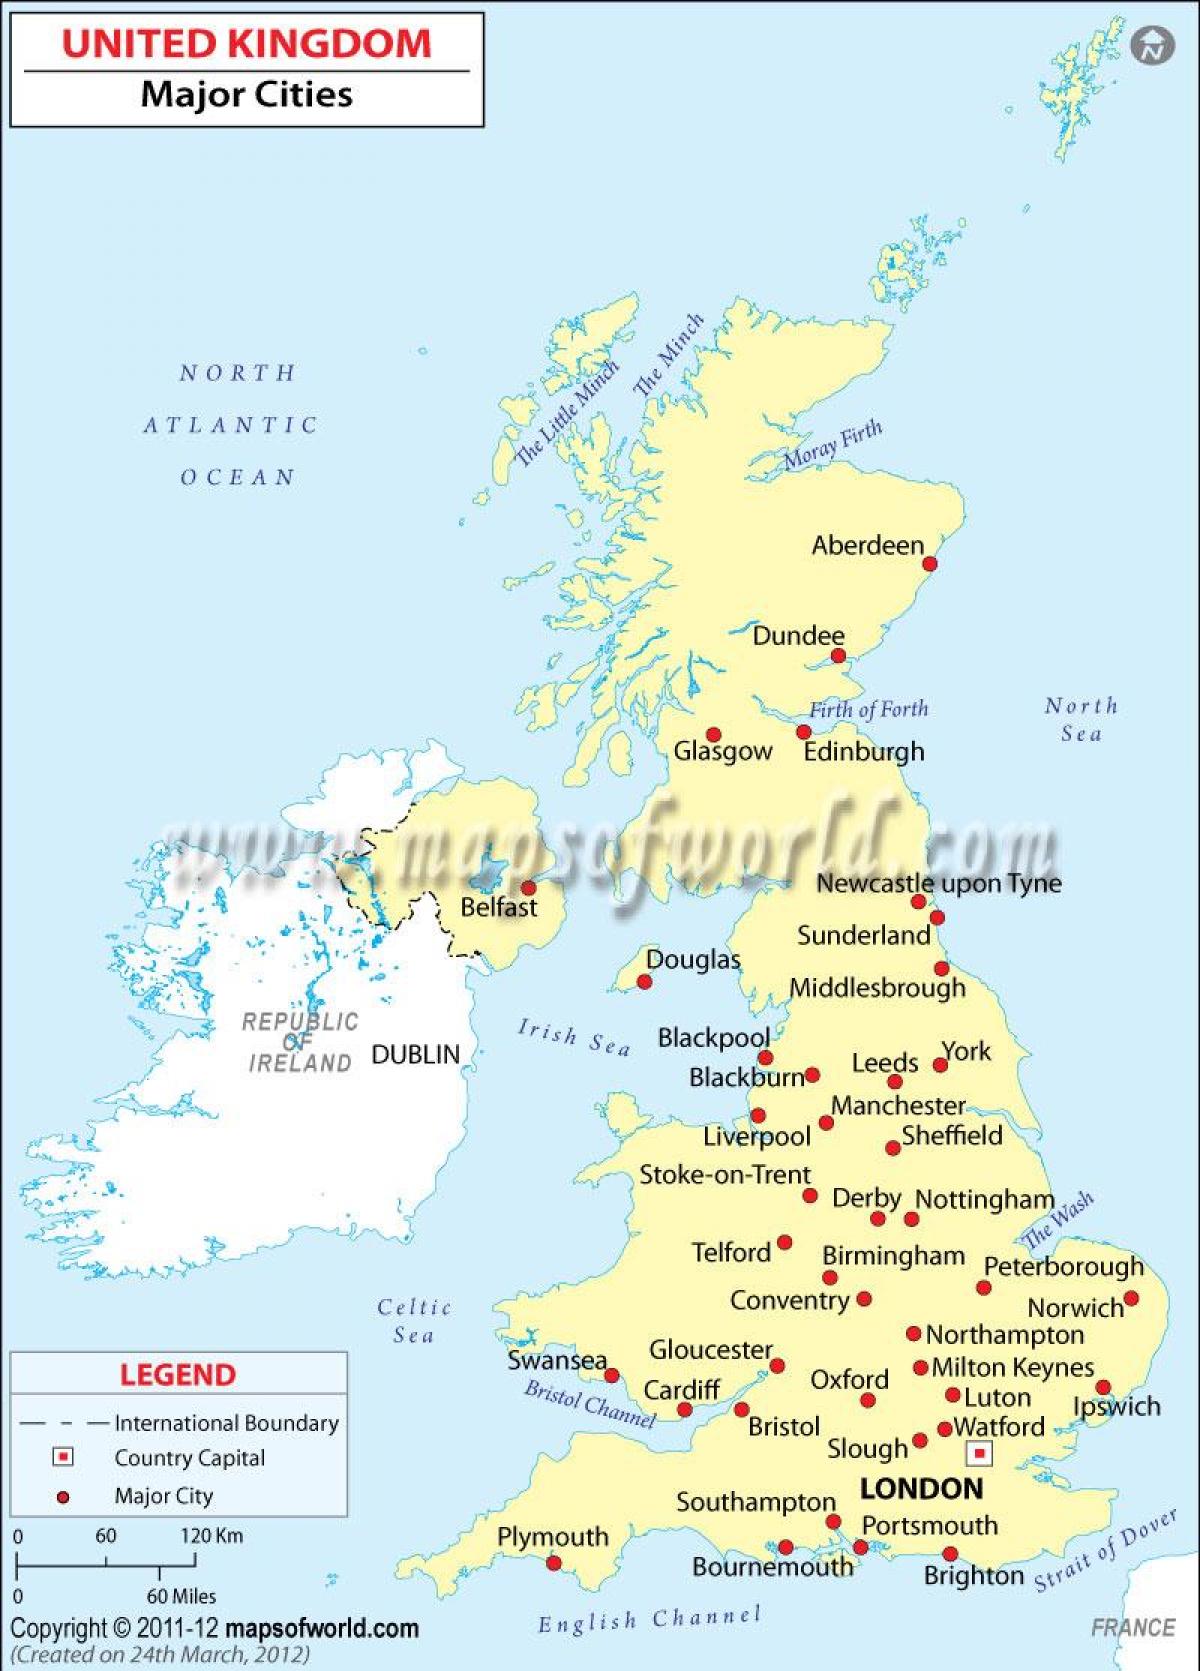 map of UK showing major cities